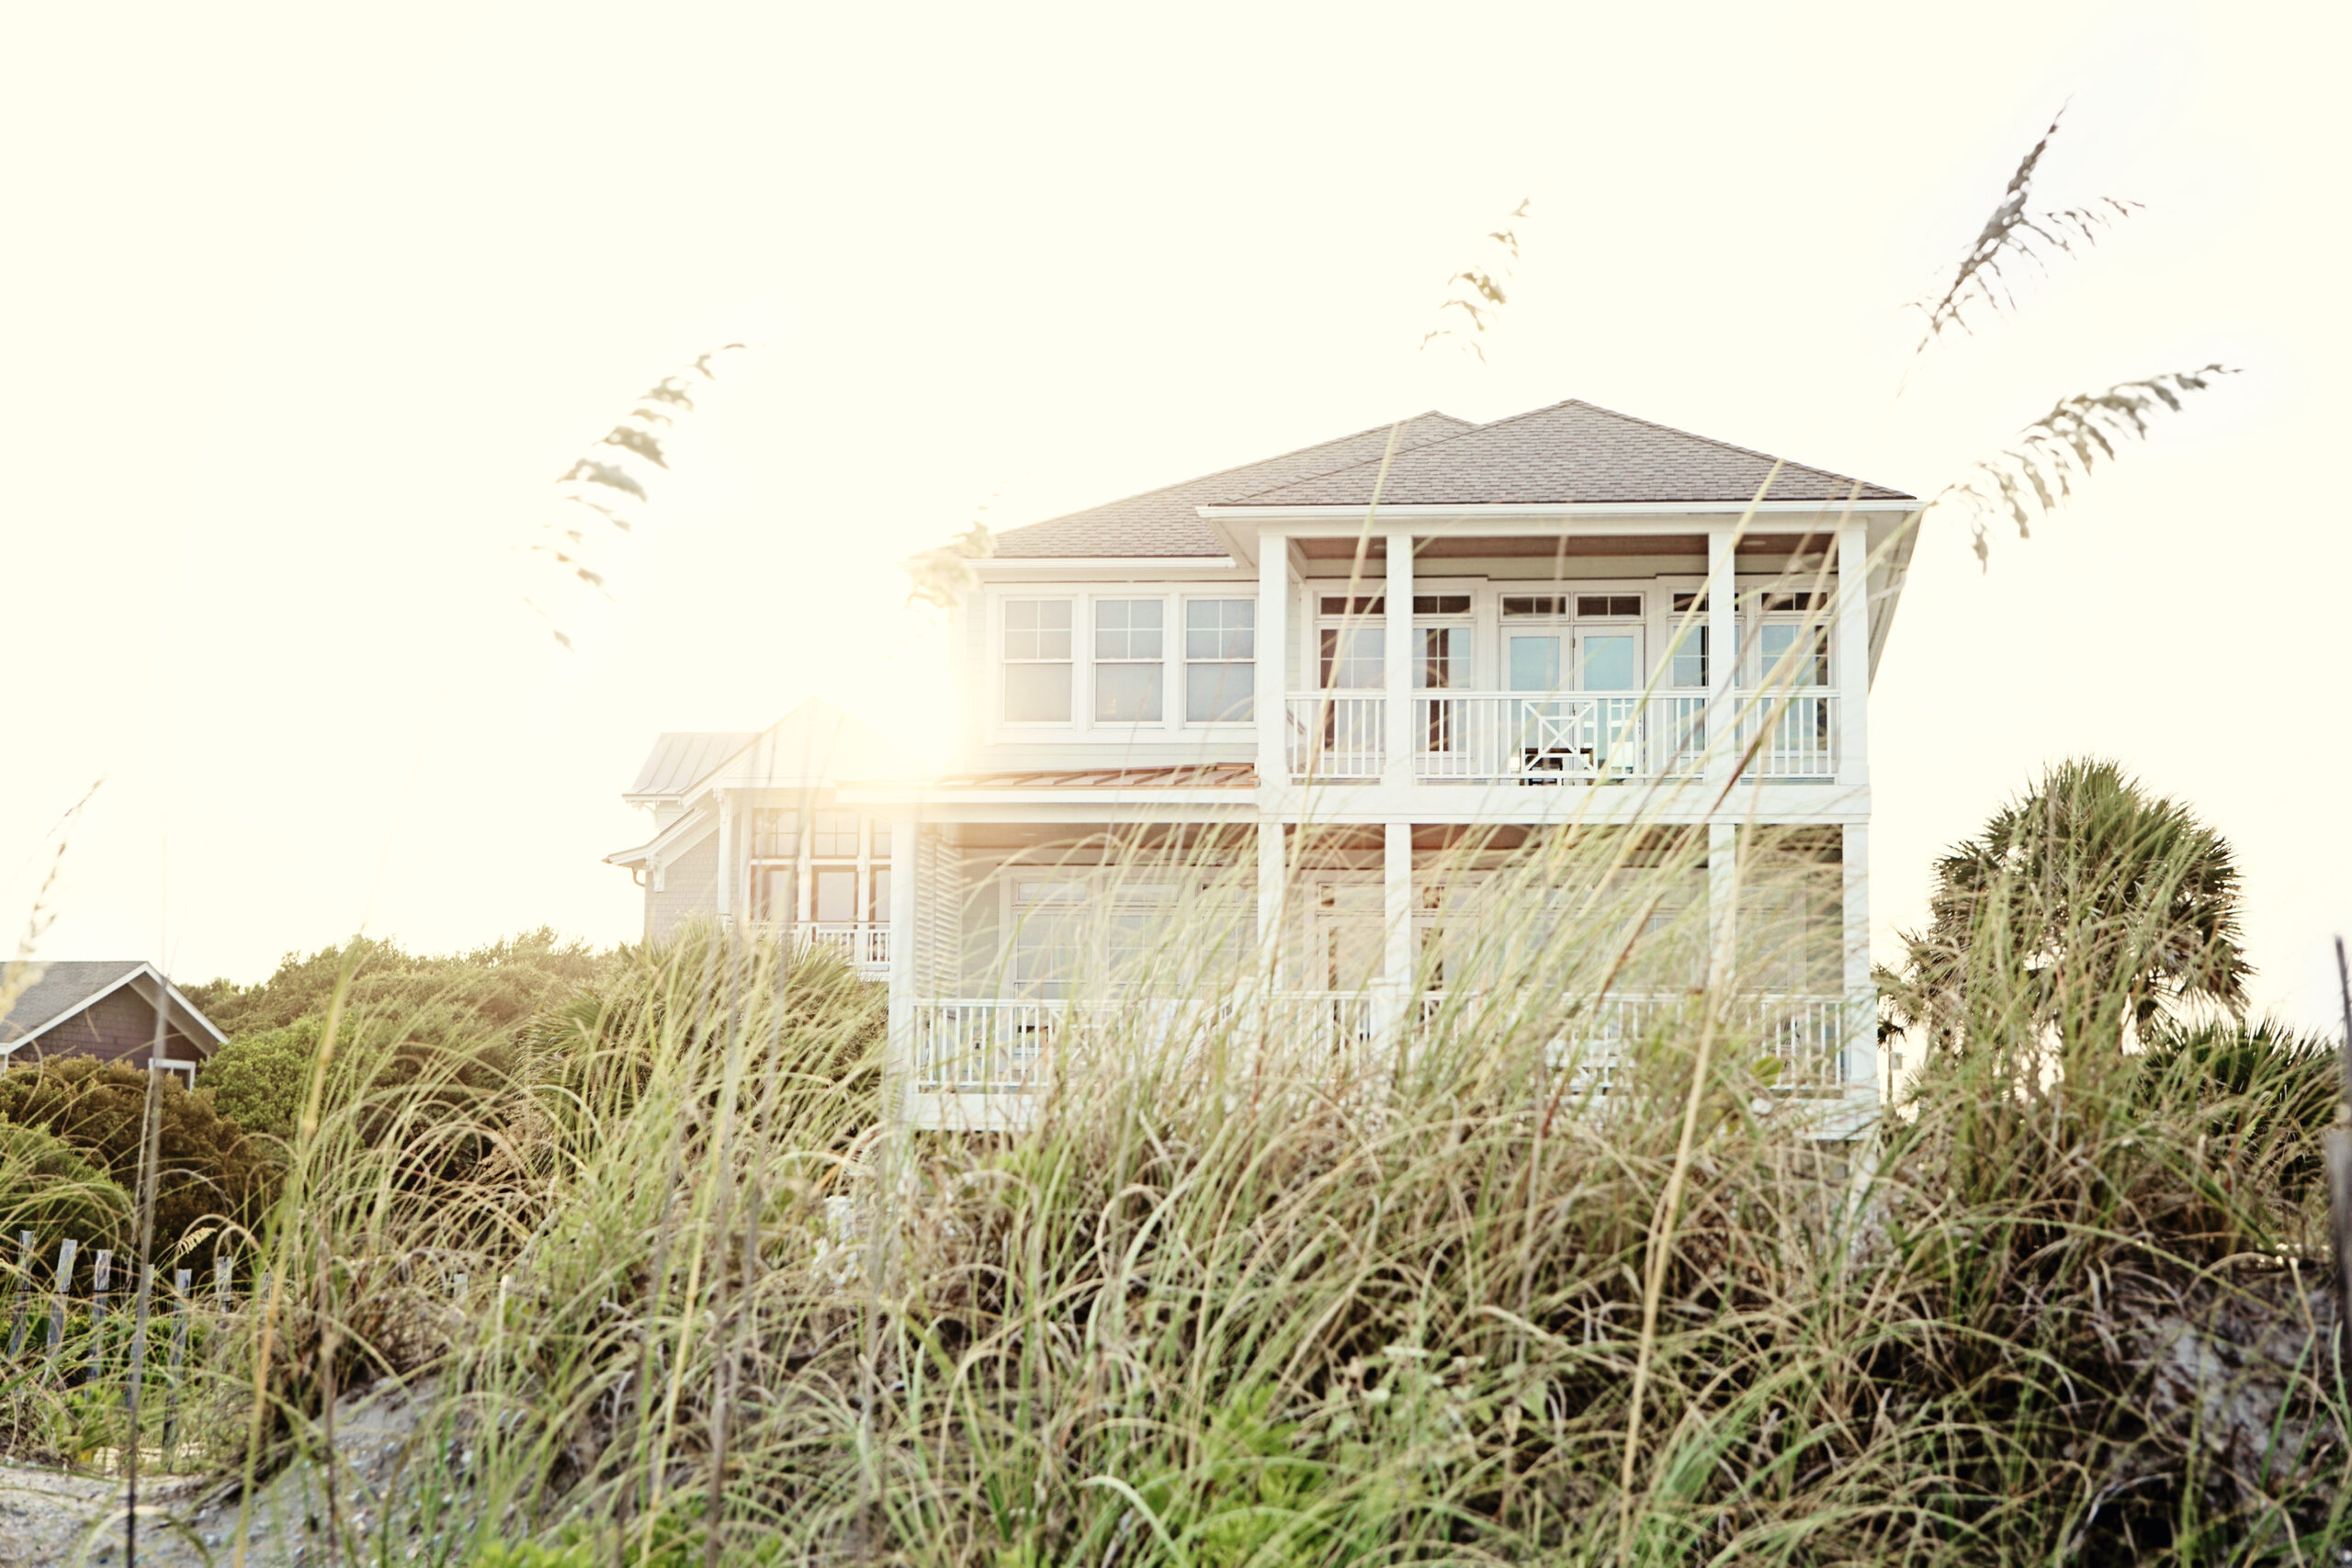 Things to Consider Before Buying a Vacation Home